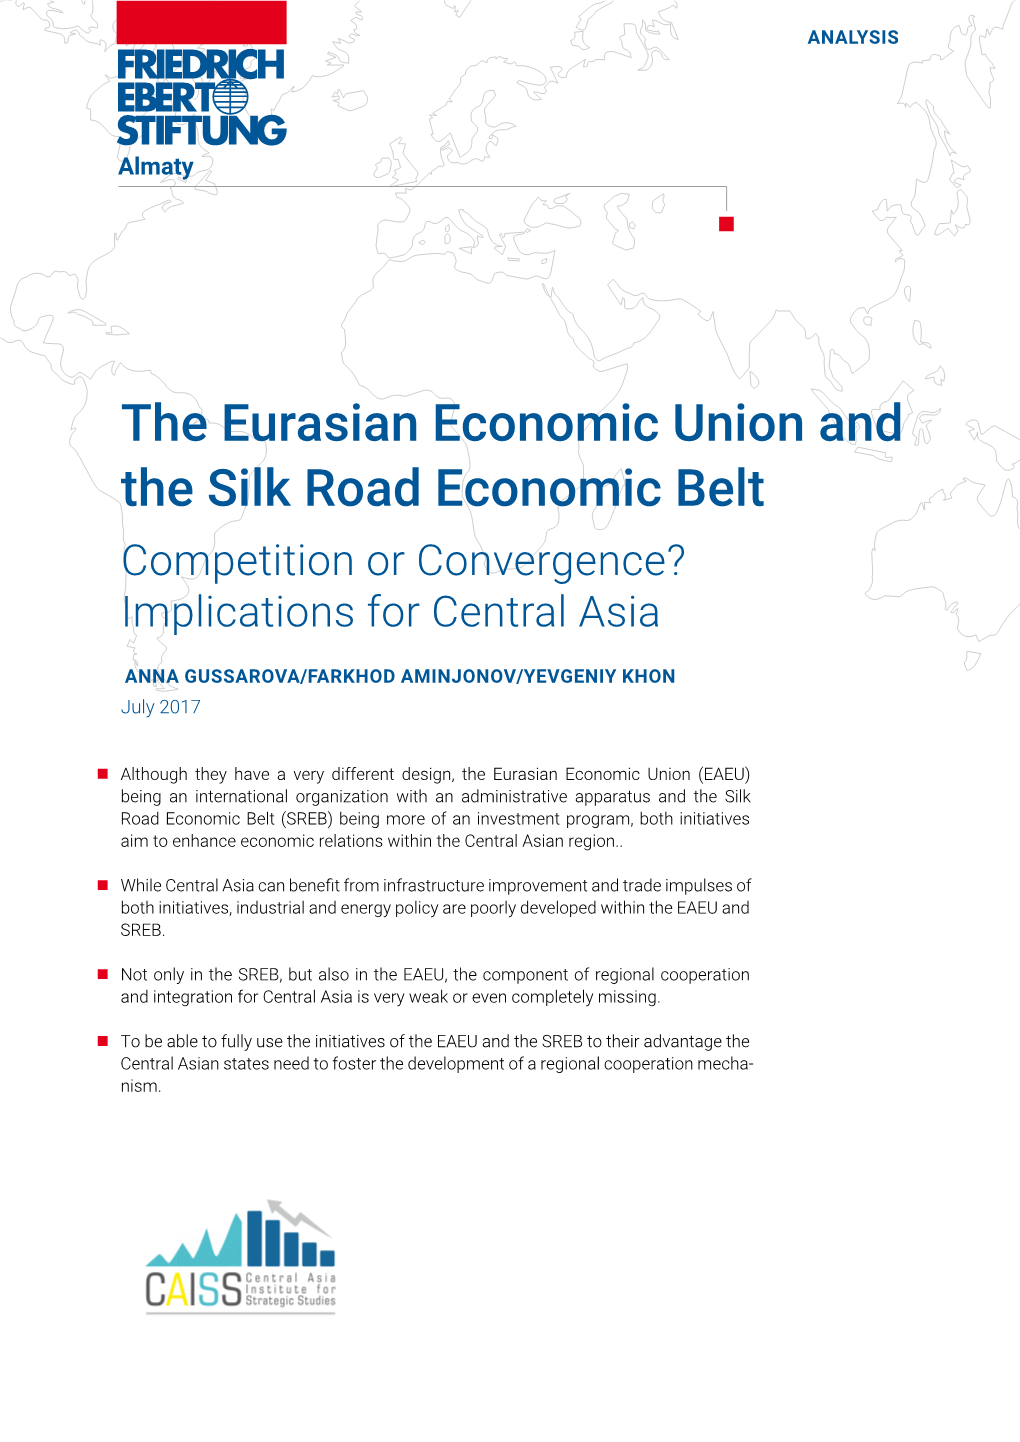 The Eurasian Economic Union and the Silk Road Economic Belt Competition Or Convergence? Implications for Central Asia